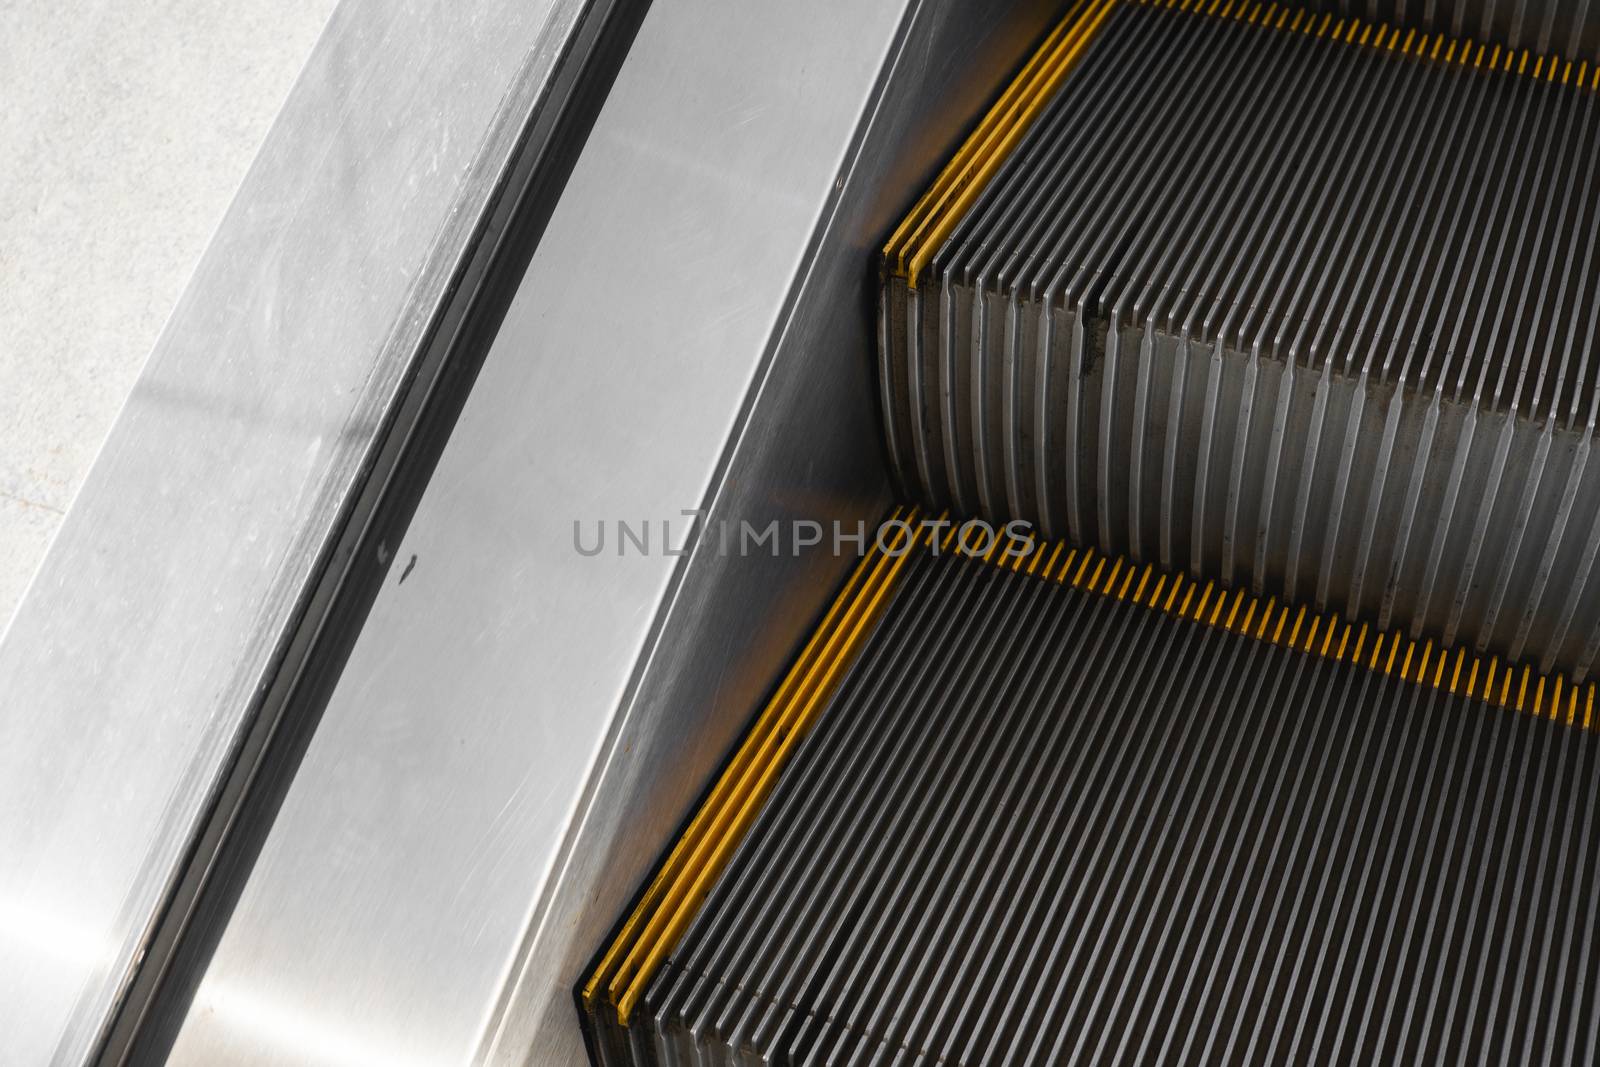 Ditry stairs on Escalator with yellow strips